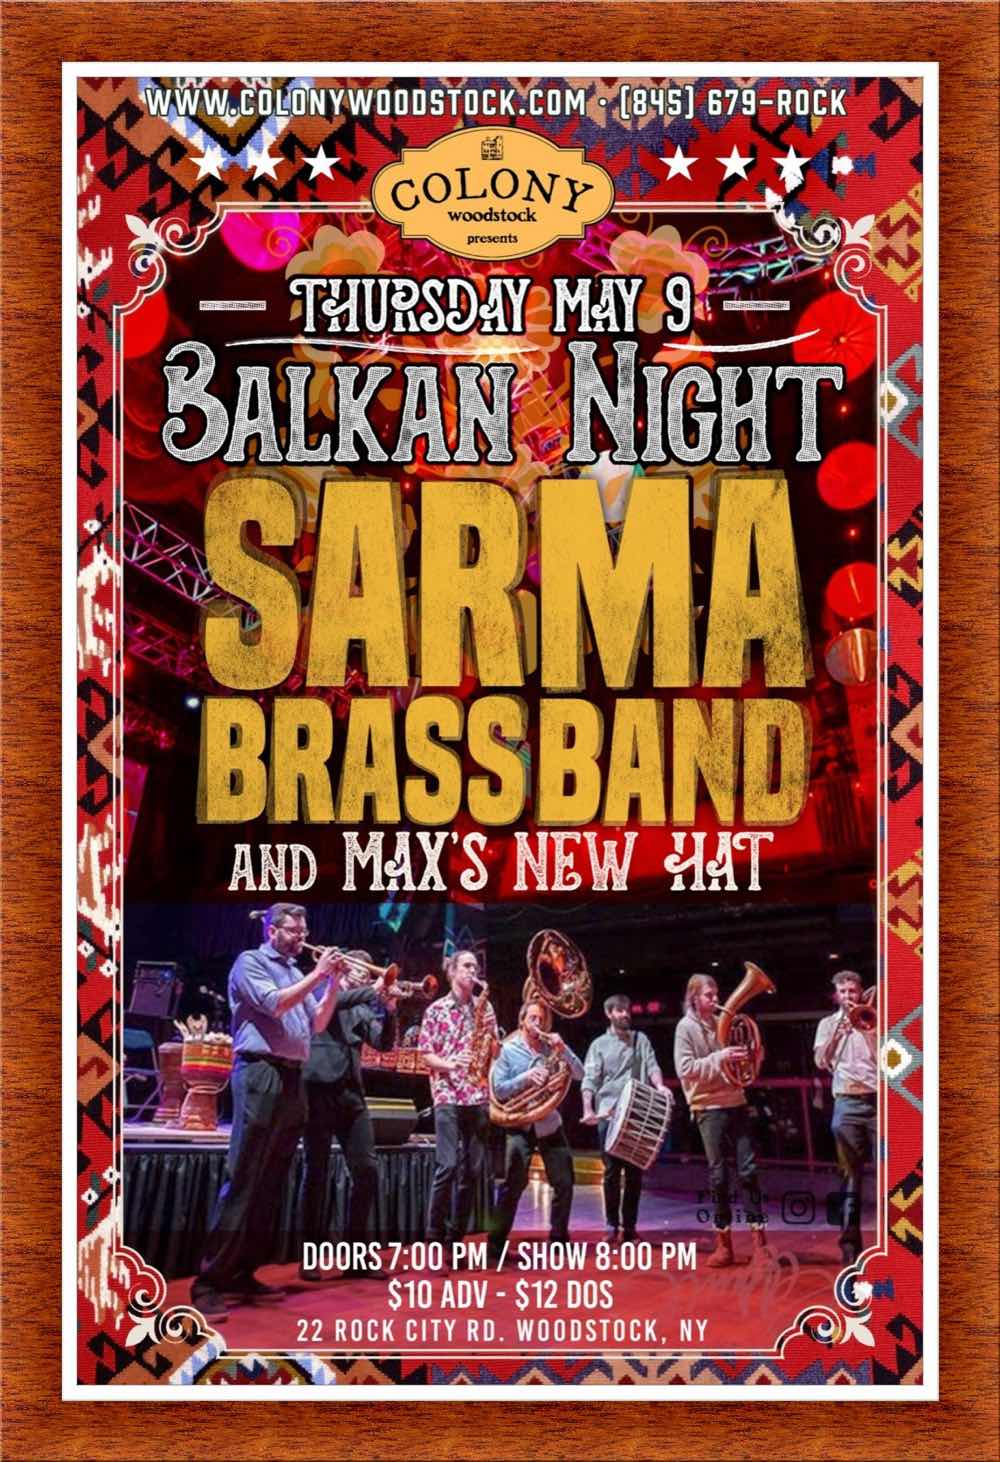 MNH-Sarma-Brass-Band-Colony-Woodstock-May-8-2019-1000px-wide